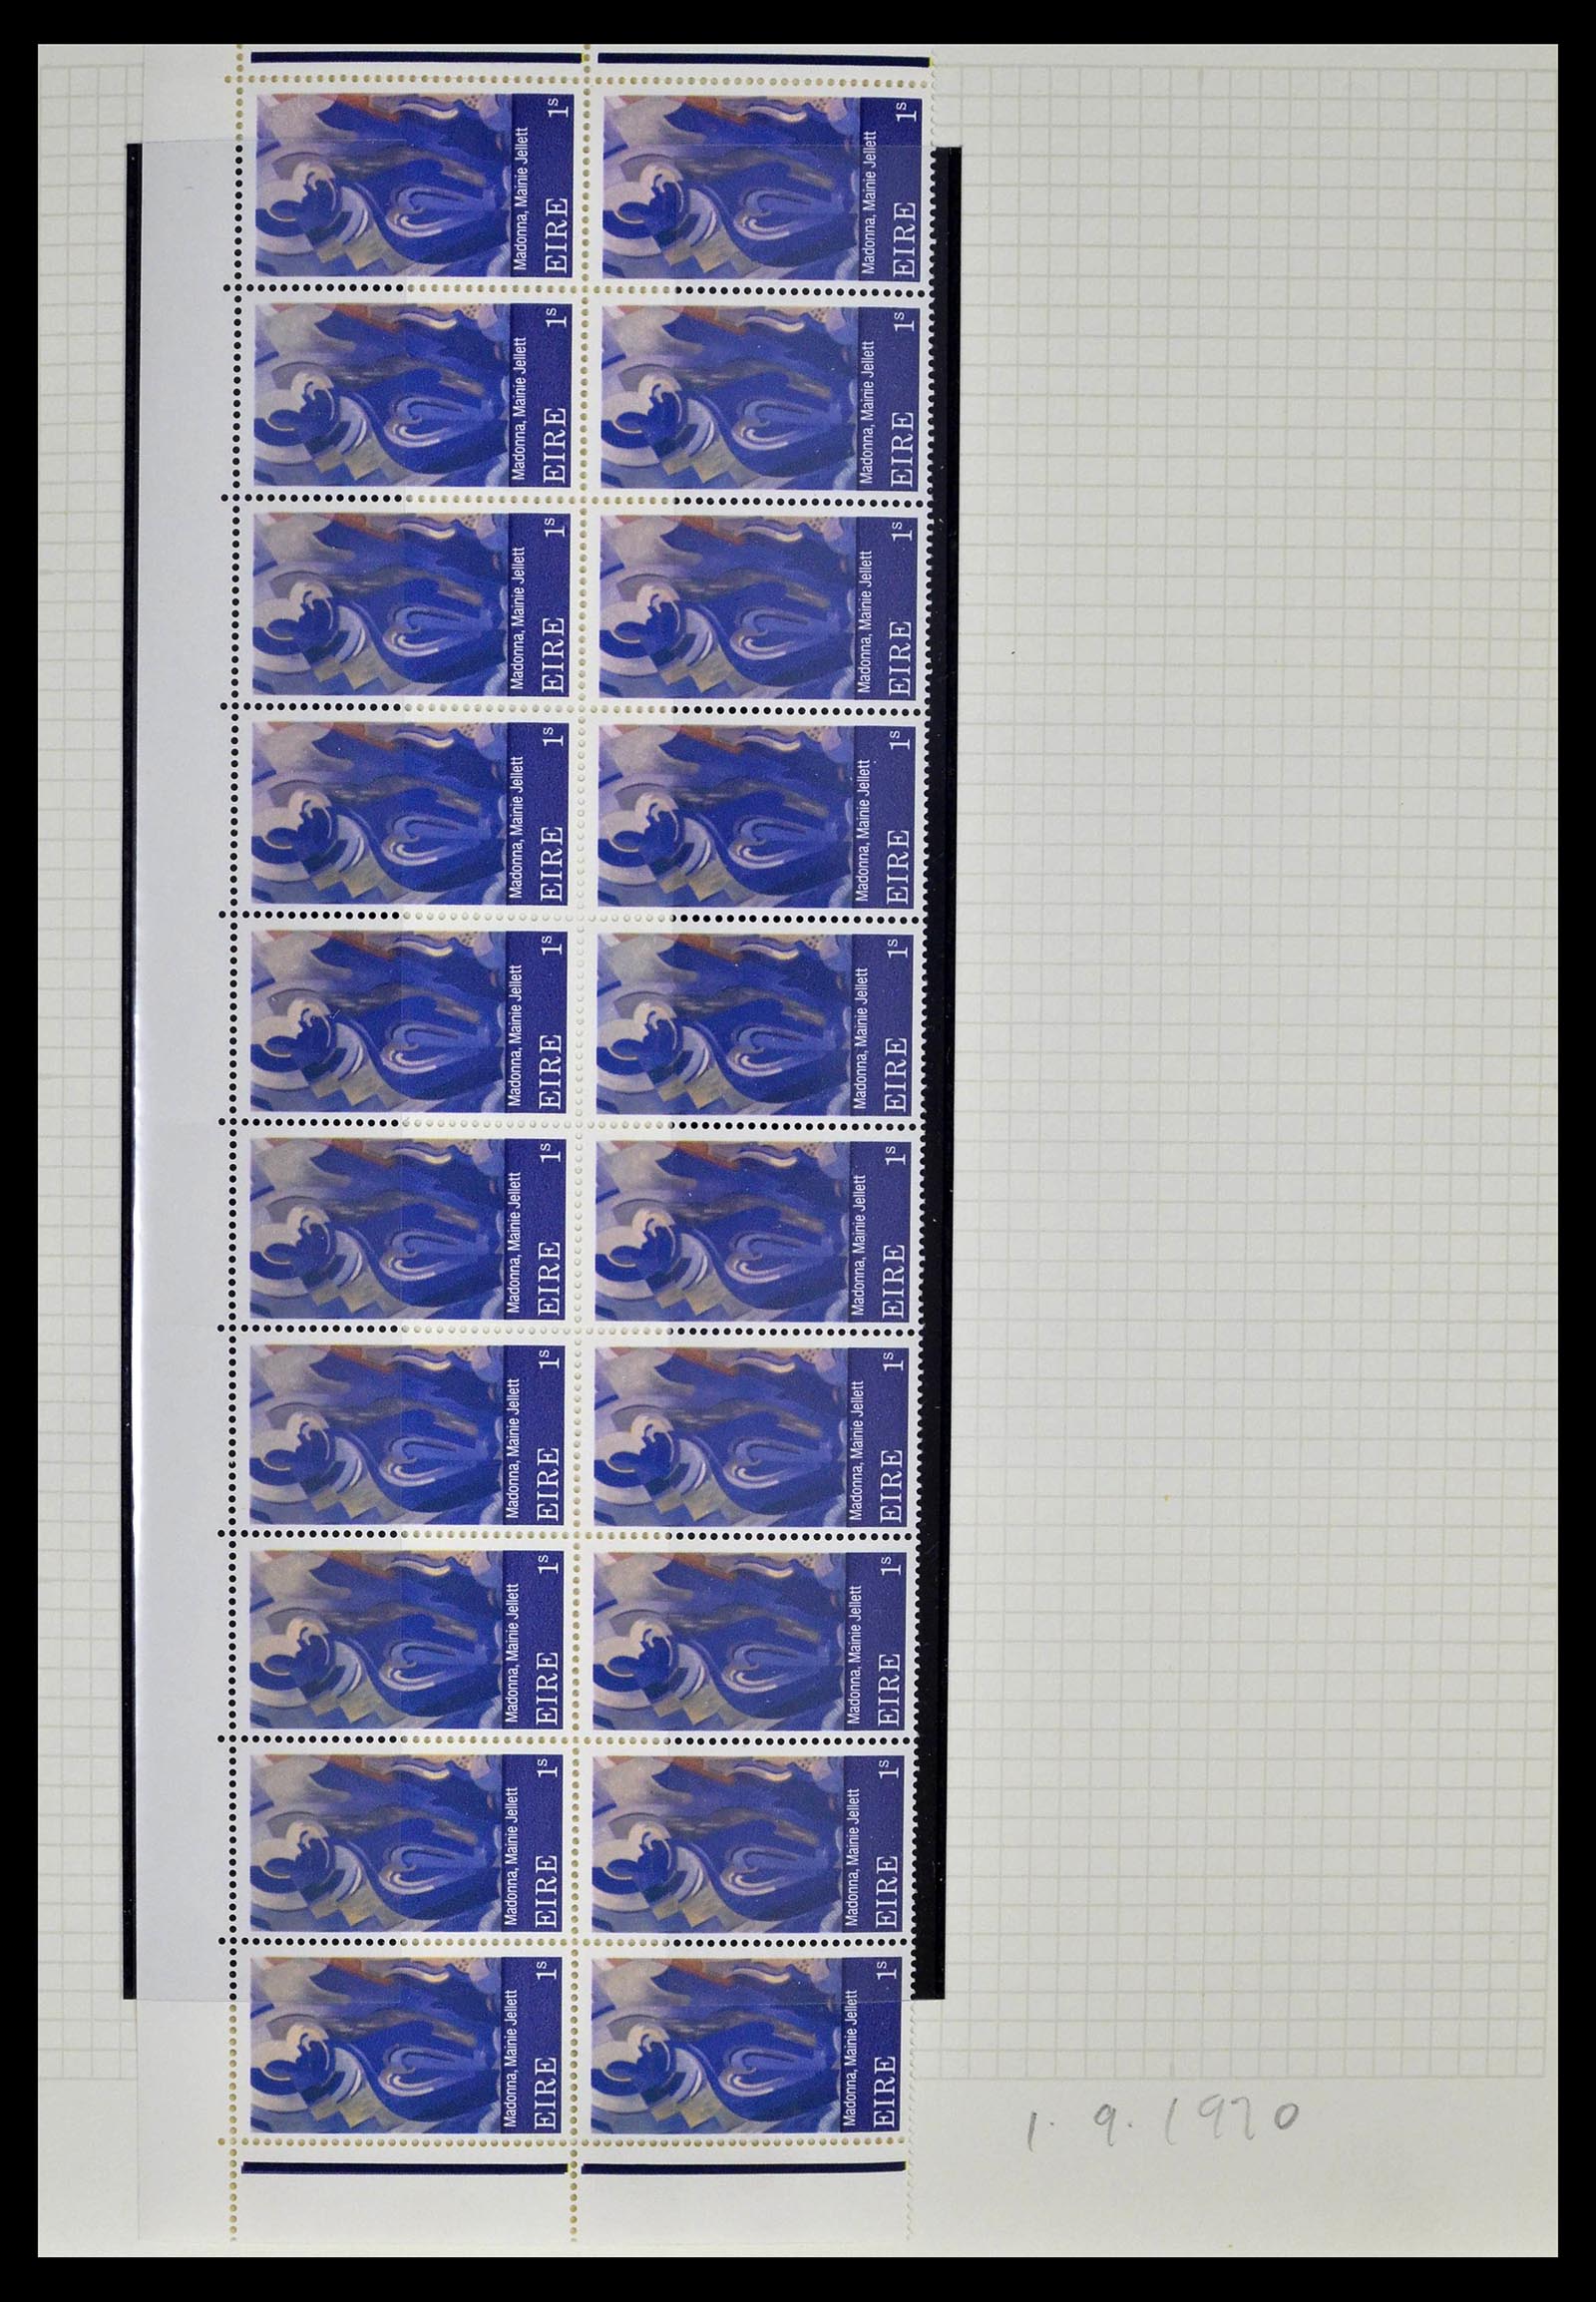 39272 0013 - Stamp collection 39272 Ireland plateflaws and varities 1963-1981.